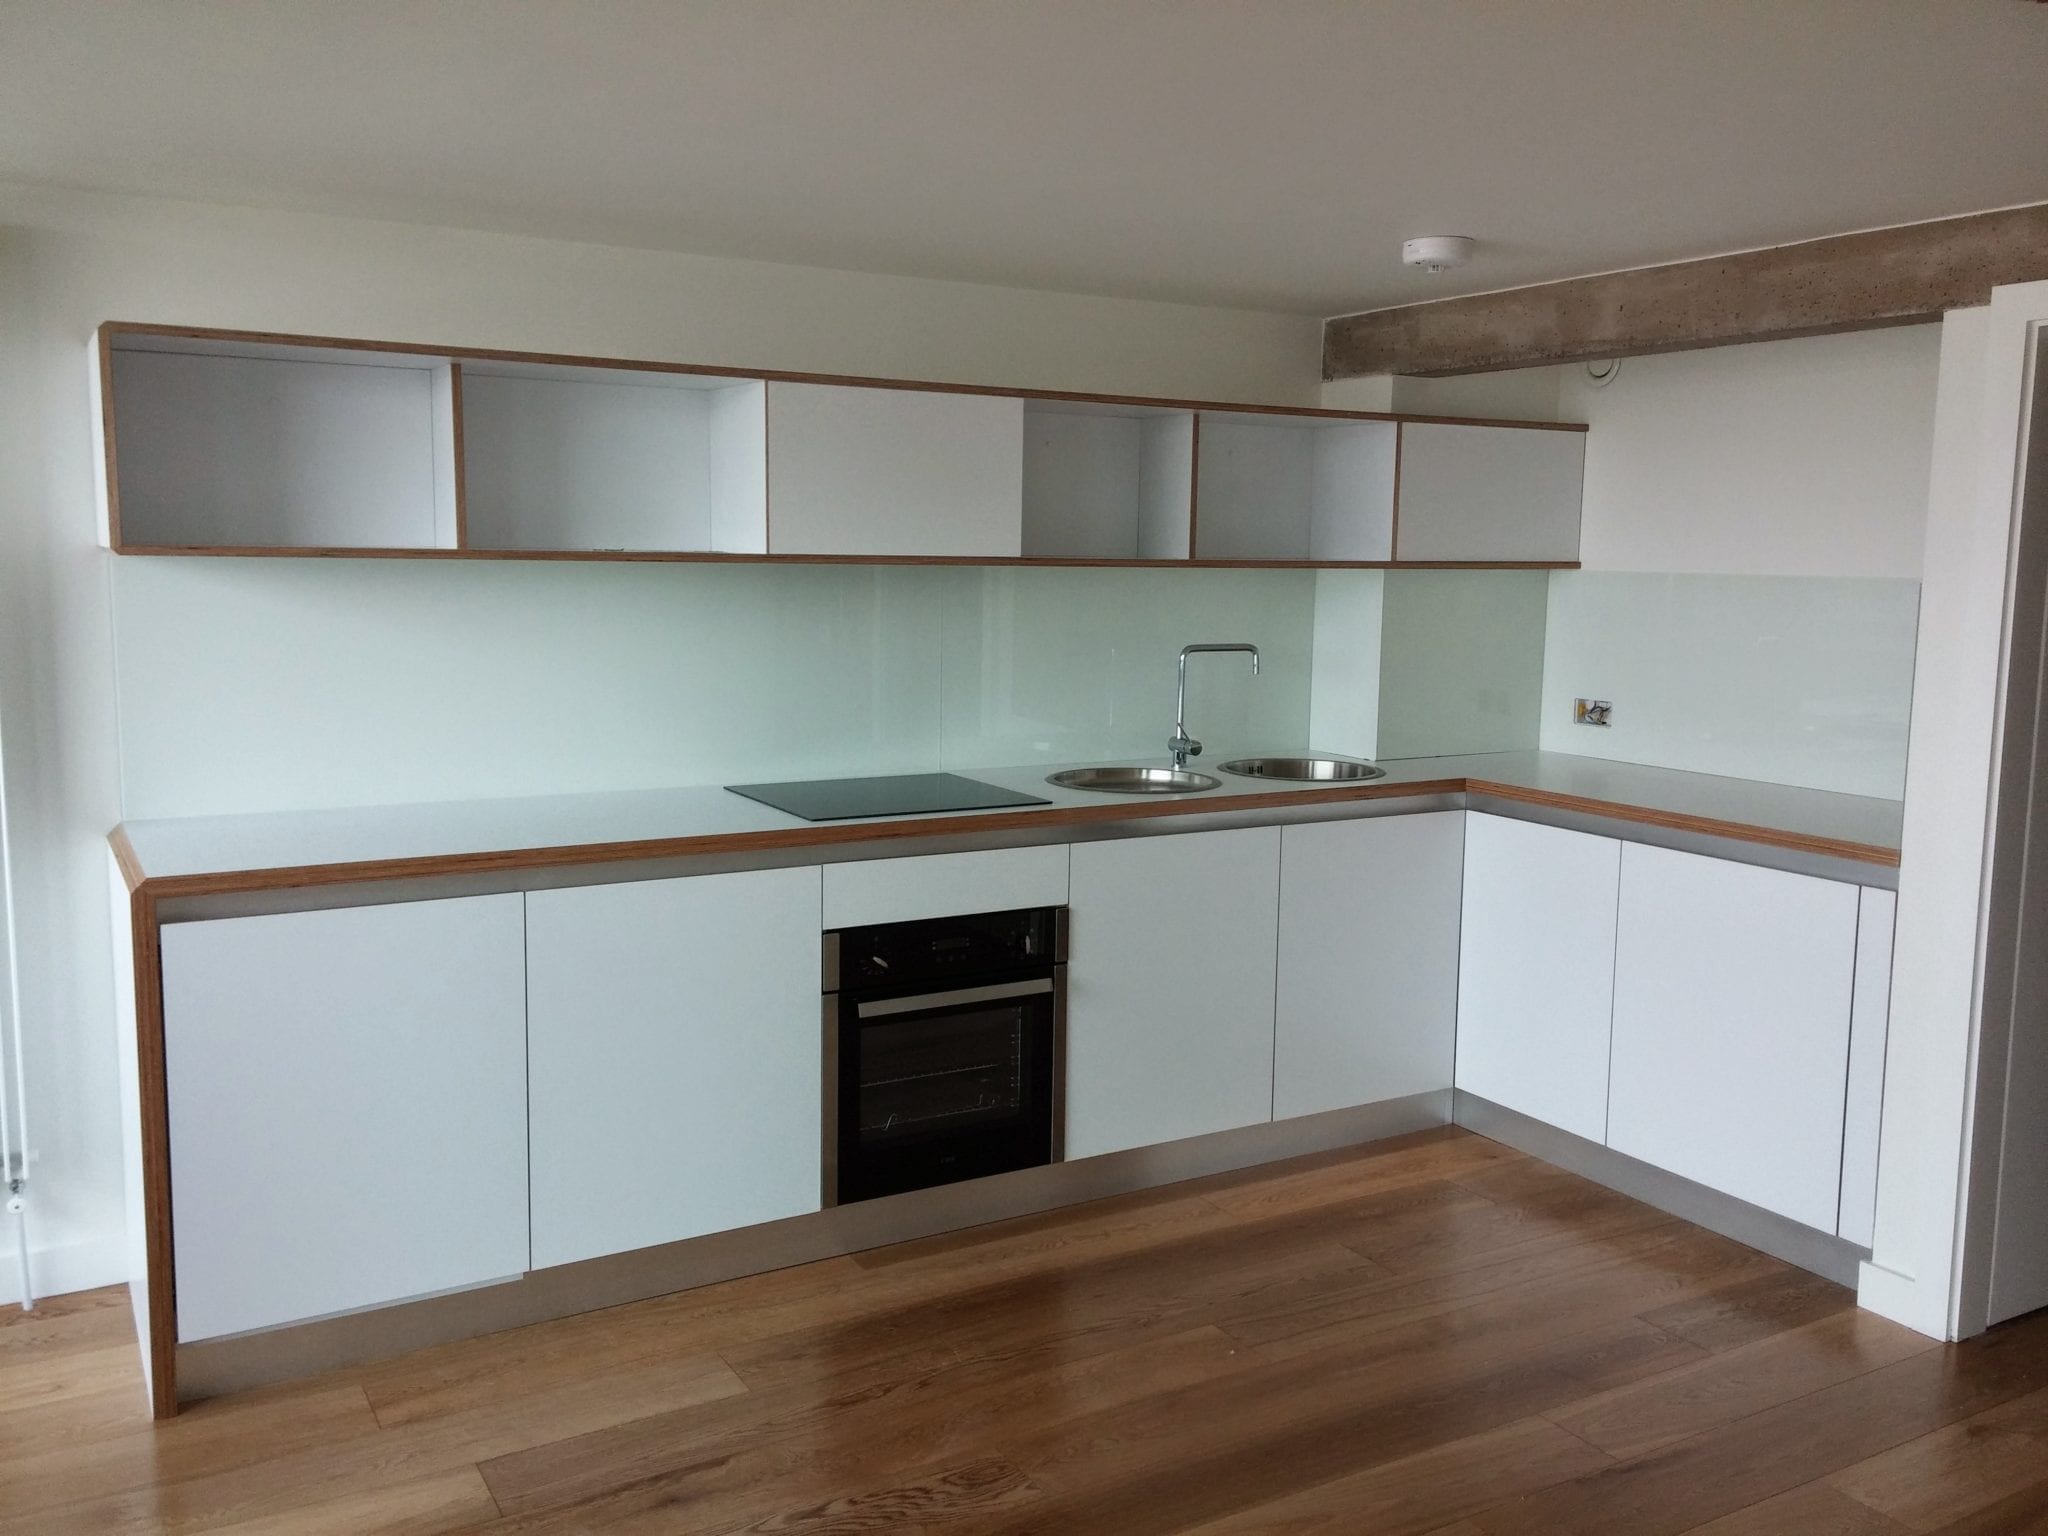 Plywood kitchen furniture fully bespoke made to measure.